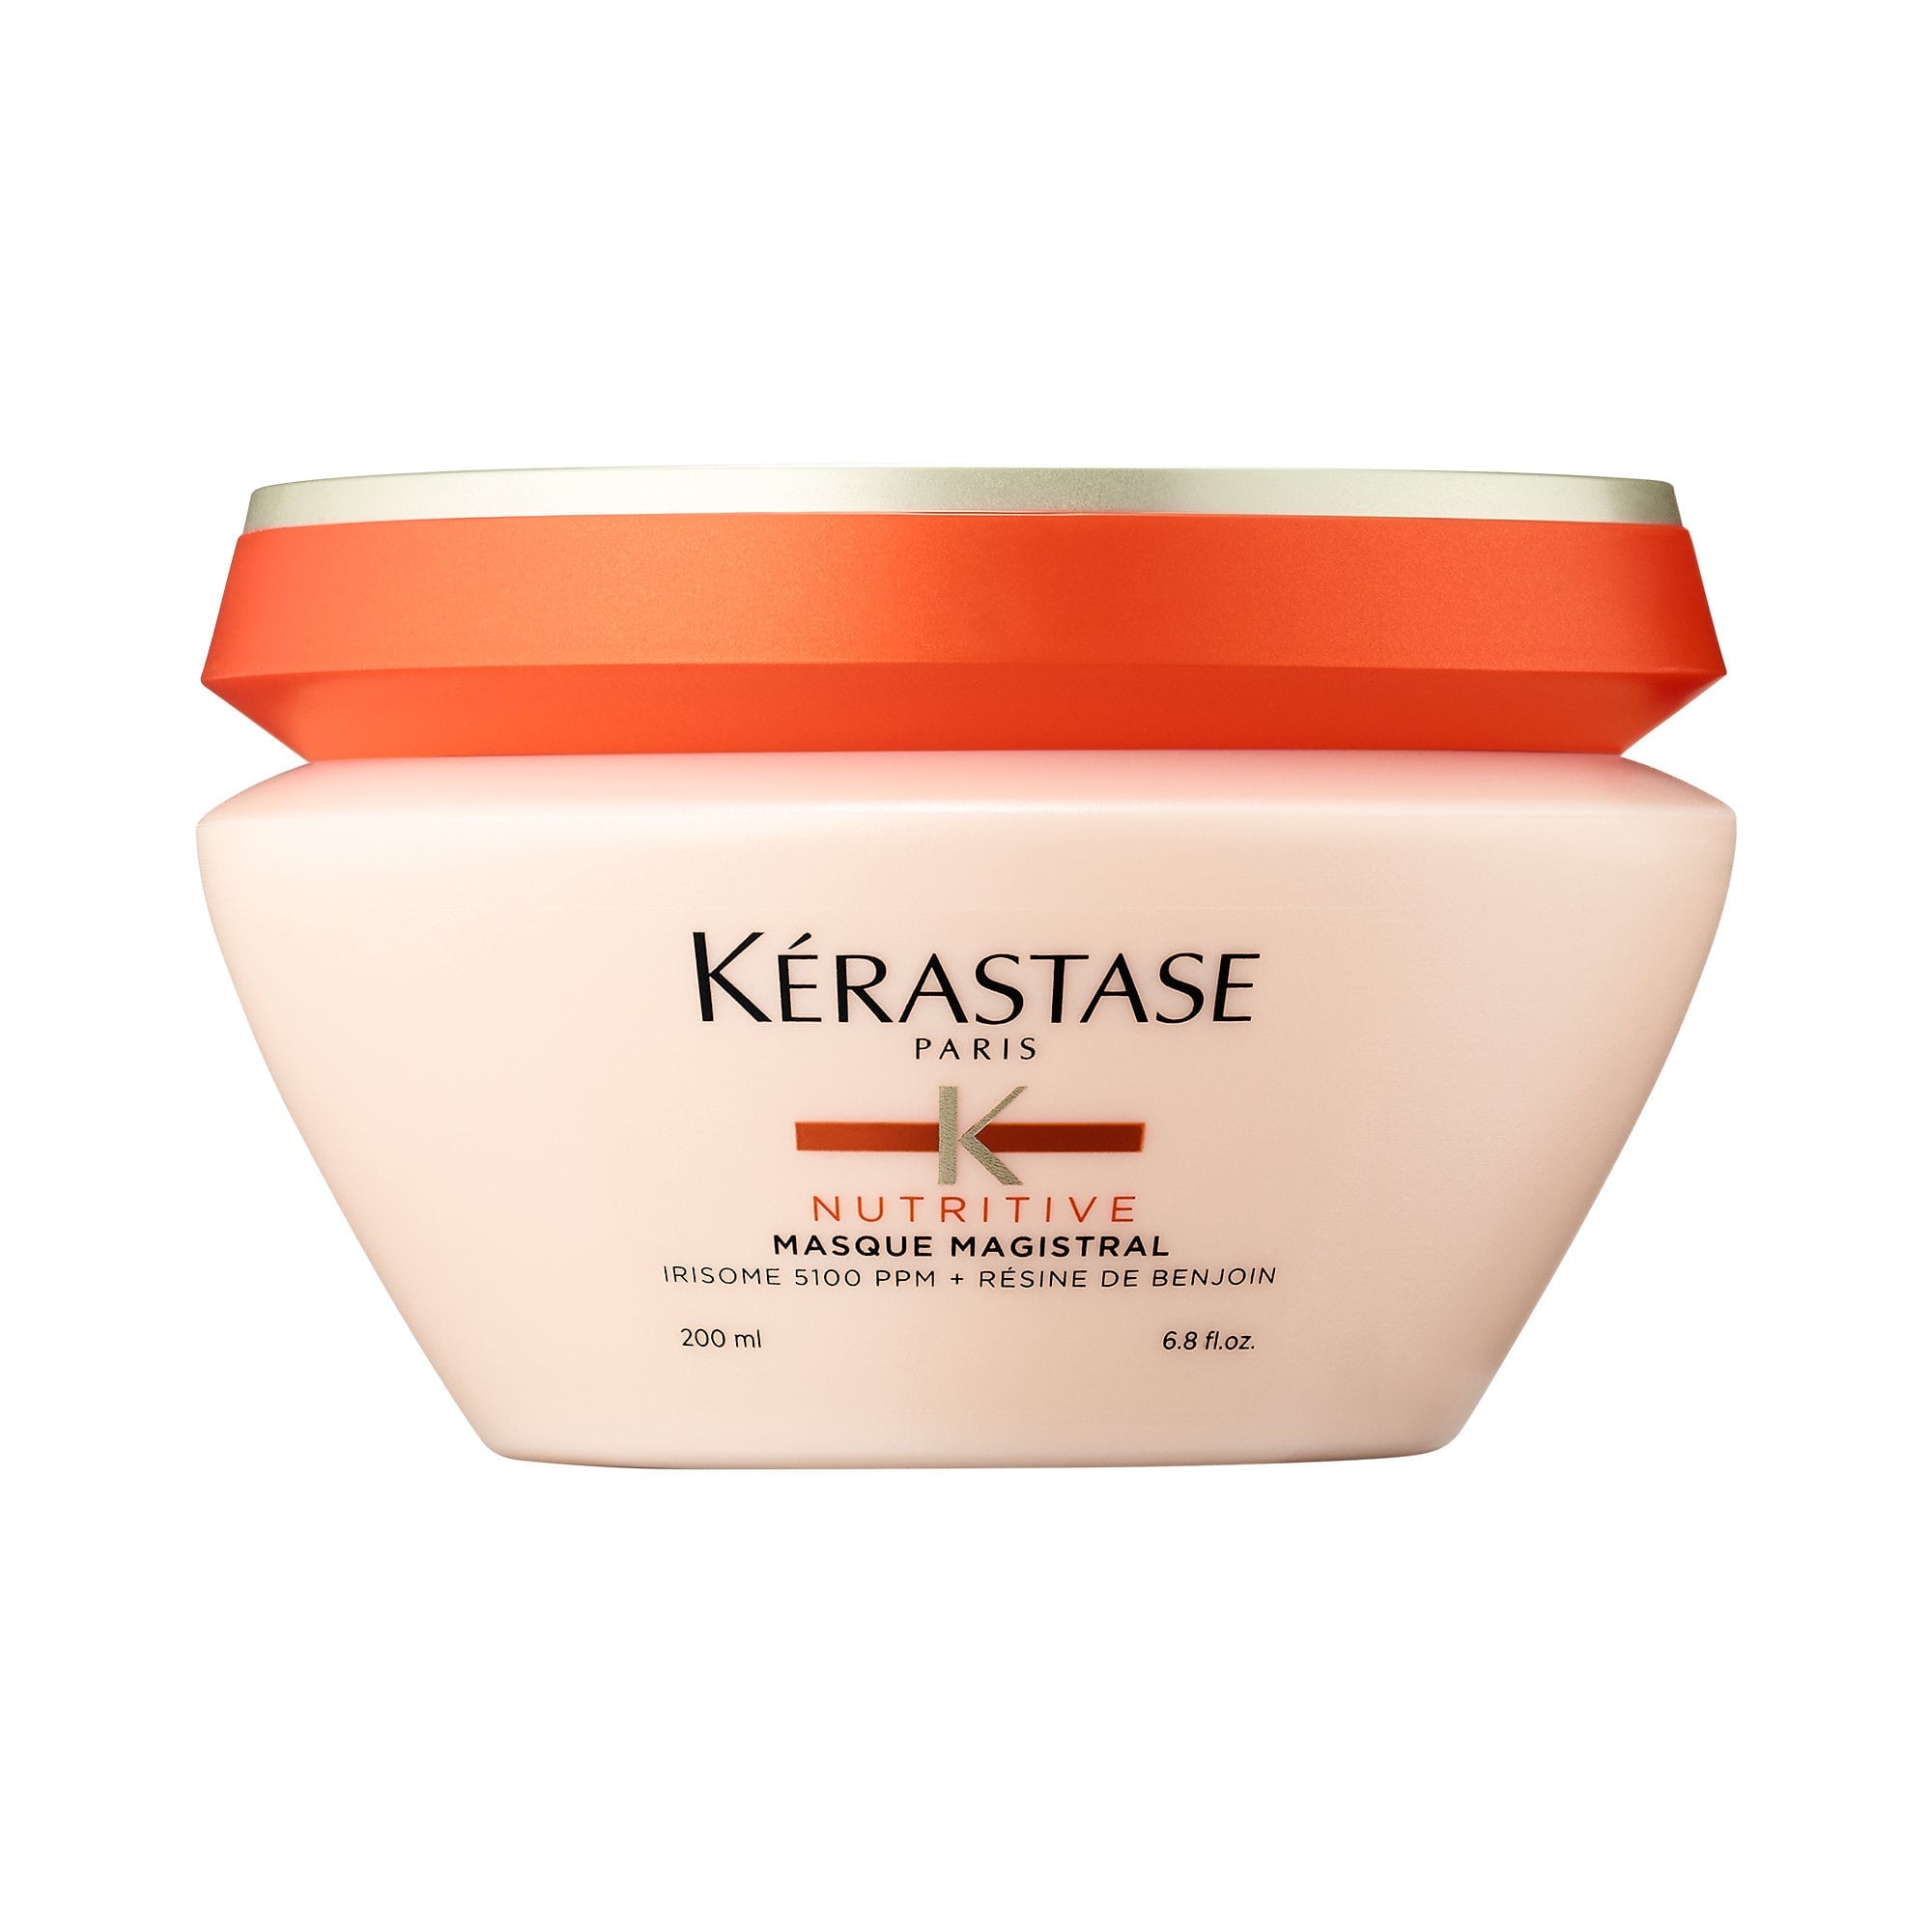 Kérastase Nutritive Mask for Severely Dry Hair | These Are Hair Masks Your Hair Is Practically Begging You Buy Sephora | POPSUGAR Beauty Photo 11